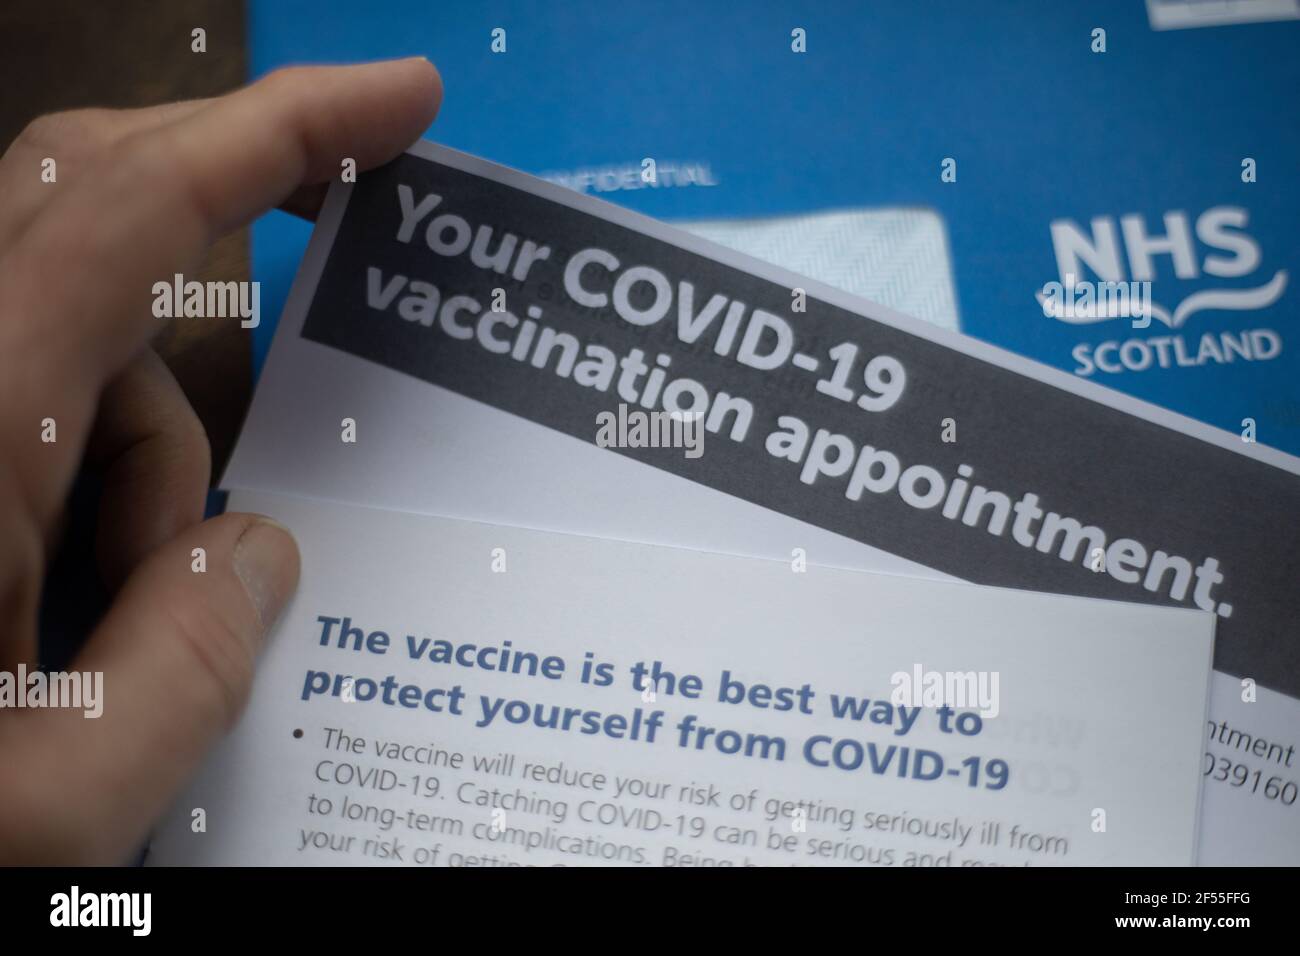 Glasgow, UK, on 24 March 2021. An NHS Scotland Covid-19 vaccination appointment letter is read by the receiver. Over 2 million people in Scotland have now had their first dose of the Covid-19 CoronaVirus vaccination. Photo credit: Jeremy Sutton-Hibbert/ Alamy Live News. Stock Photo